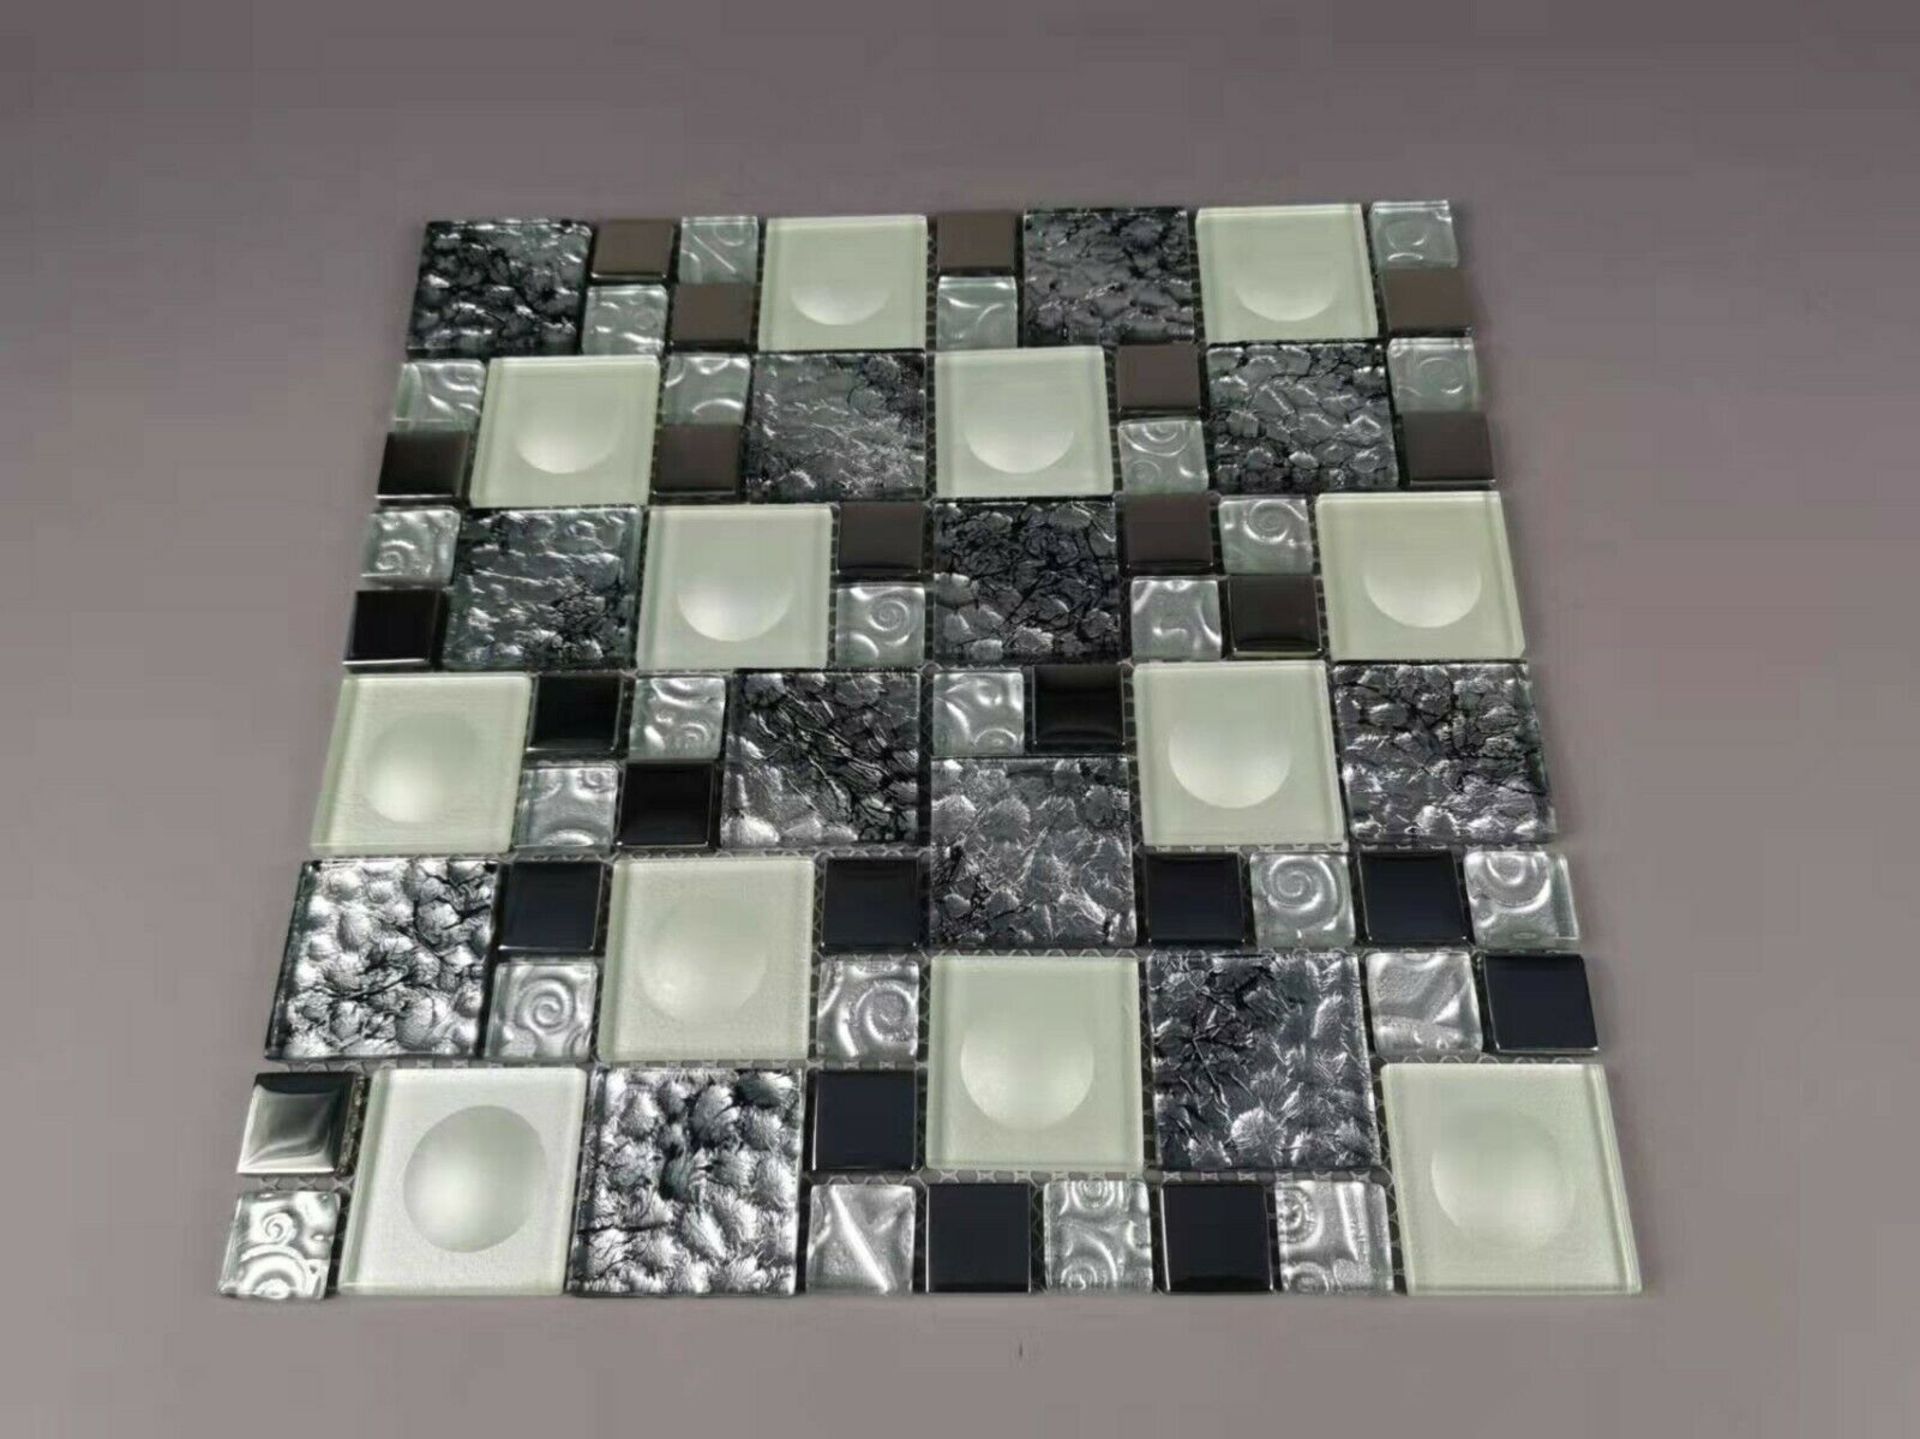 2 Square Metres - High Quality Glass/Stainless Steel Mosaic Tiles - Image 3 of 6